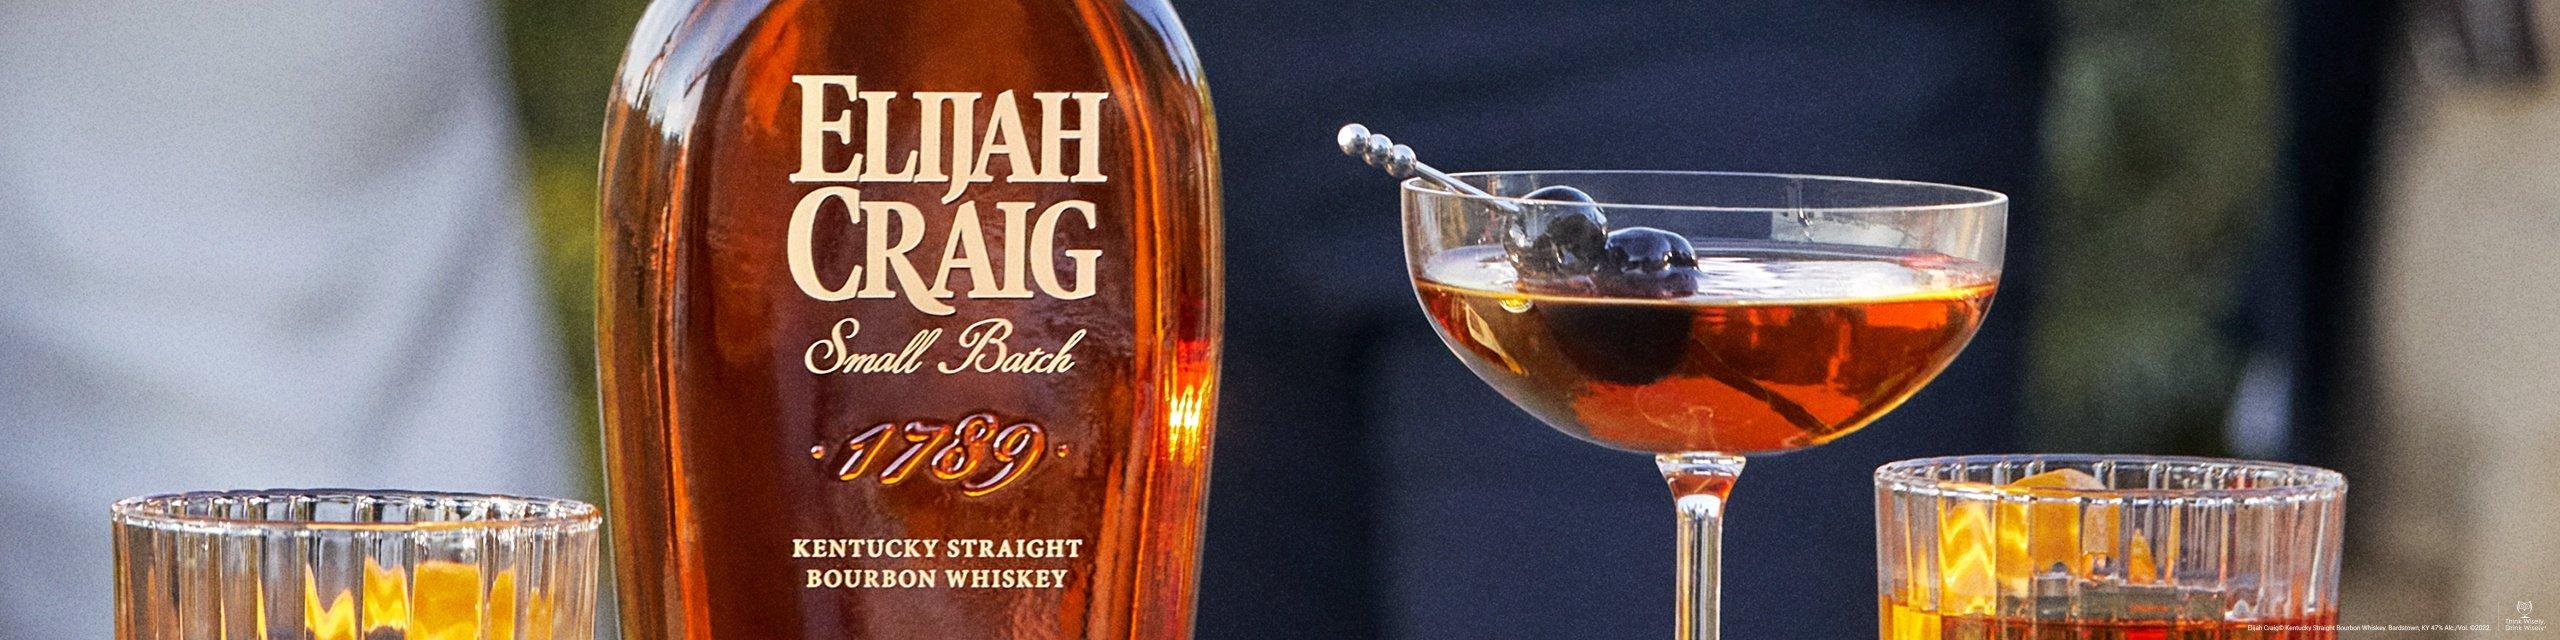 Elijah Craig is credited with pioneering the charring of the oak barrels used to age Bourbon.  At Elijah Craig, each bottle of our Bourbon is crafted with the same method used by Elijah over two hundred years ago: local corn and grains are milled and mixed with limestone-rich Kentucky spring water, then fermented and distilled. 

Buy Elijah Craig on Minibar Delivery! 